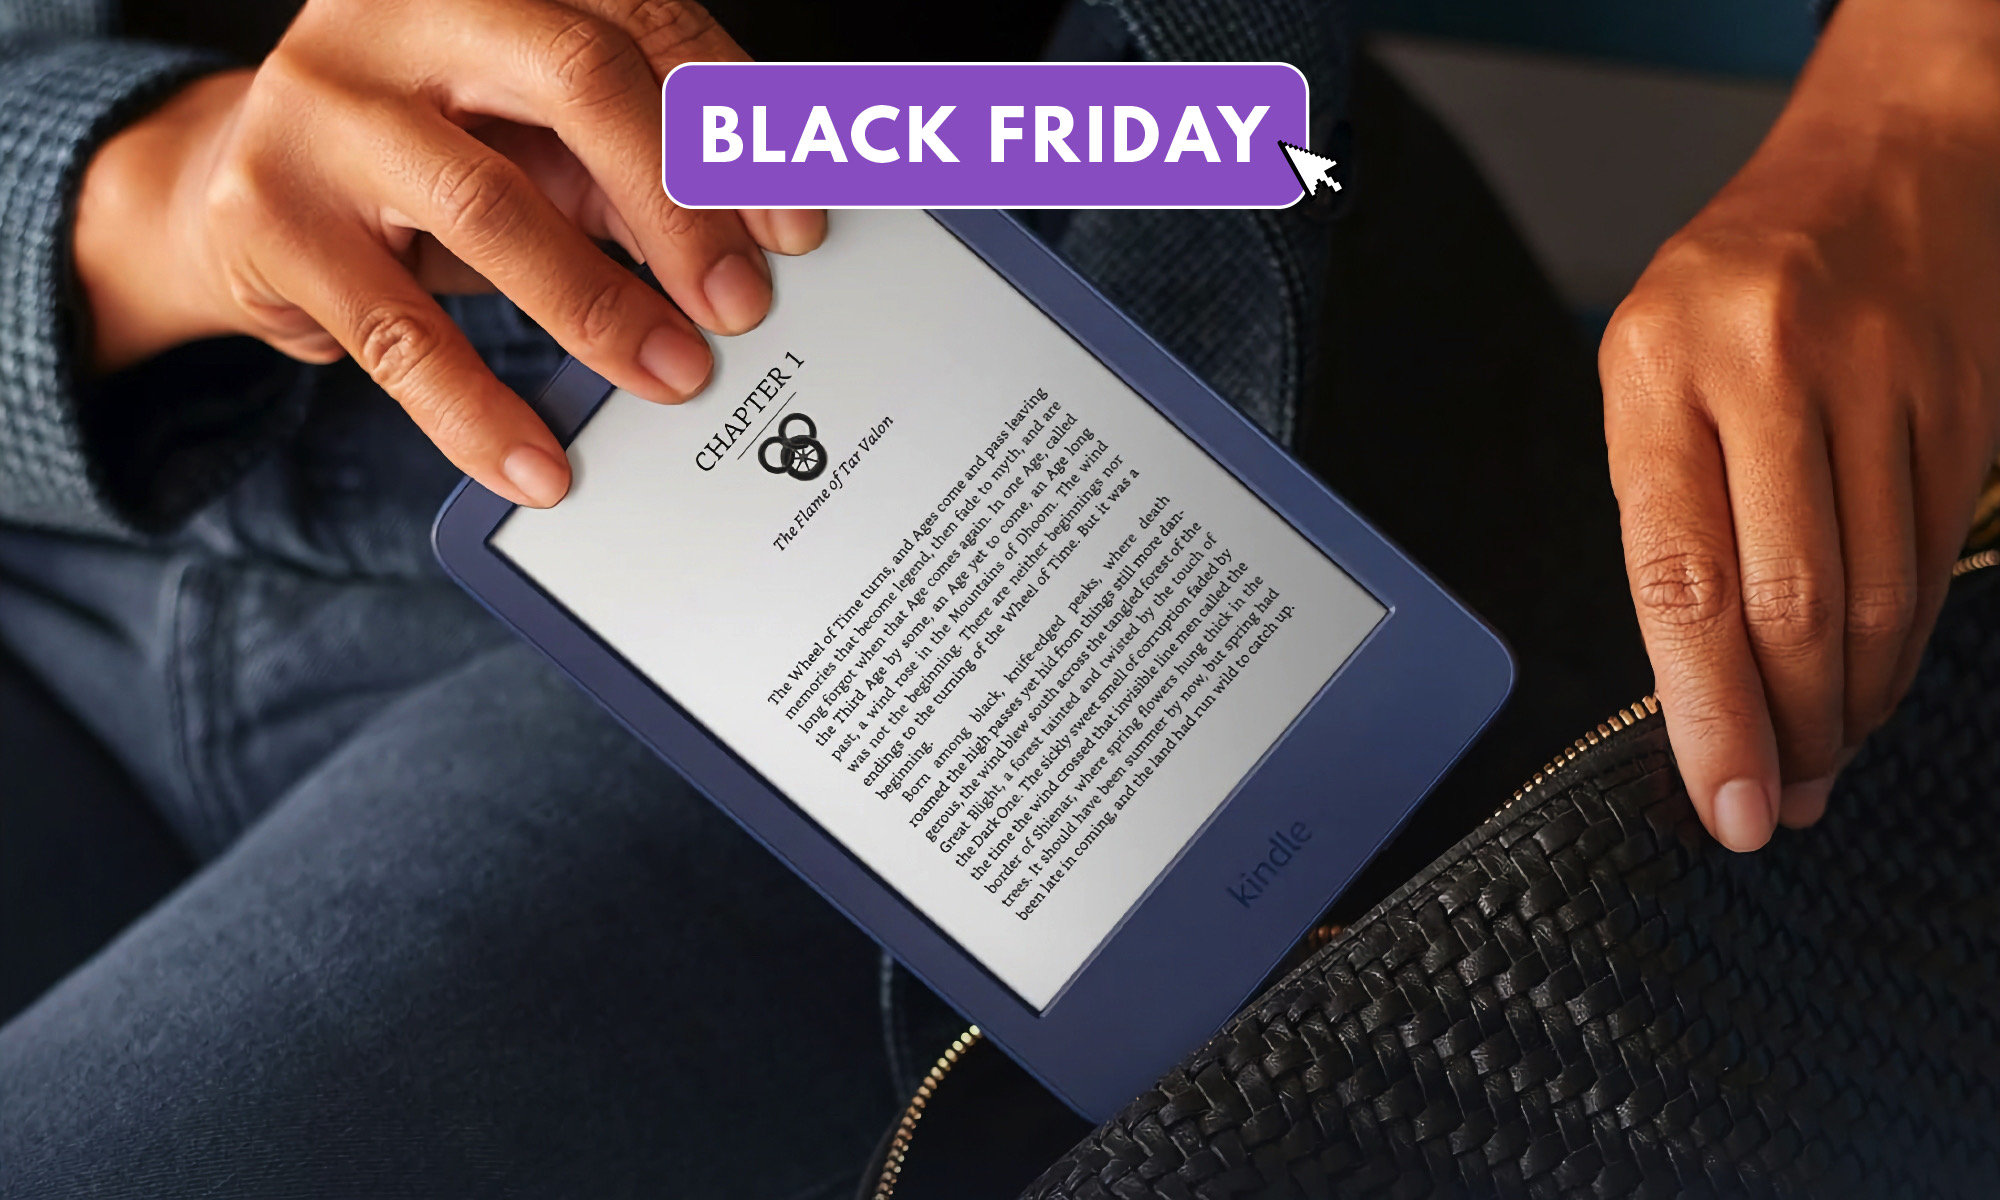 Amazon's Kindle is down to $80 for Black Friday